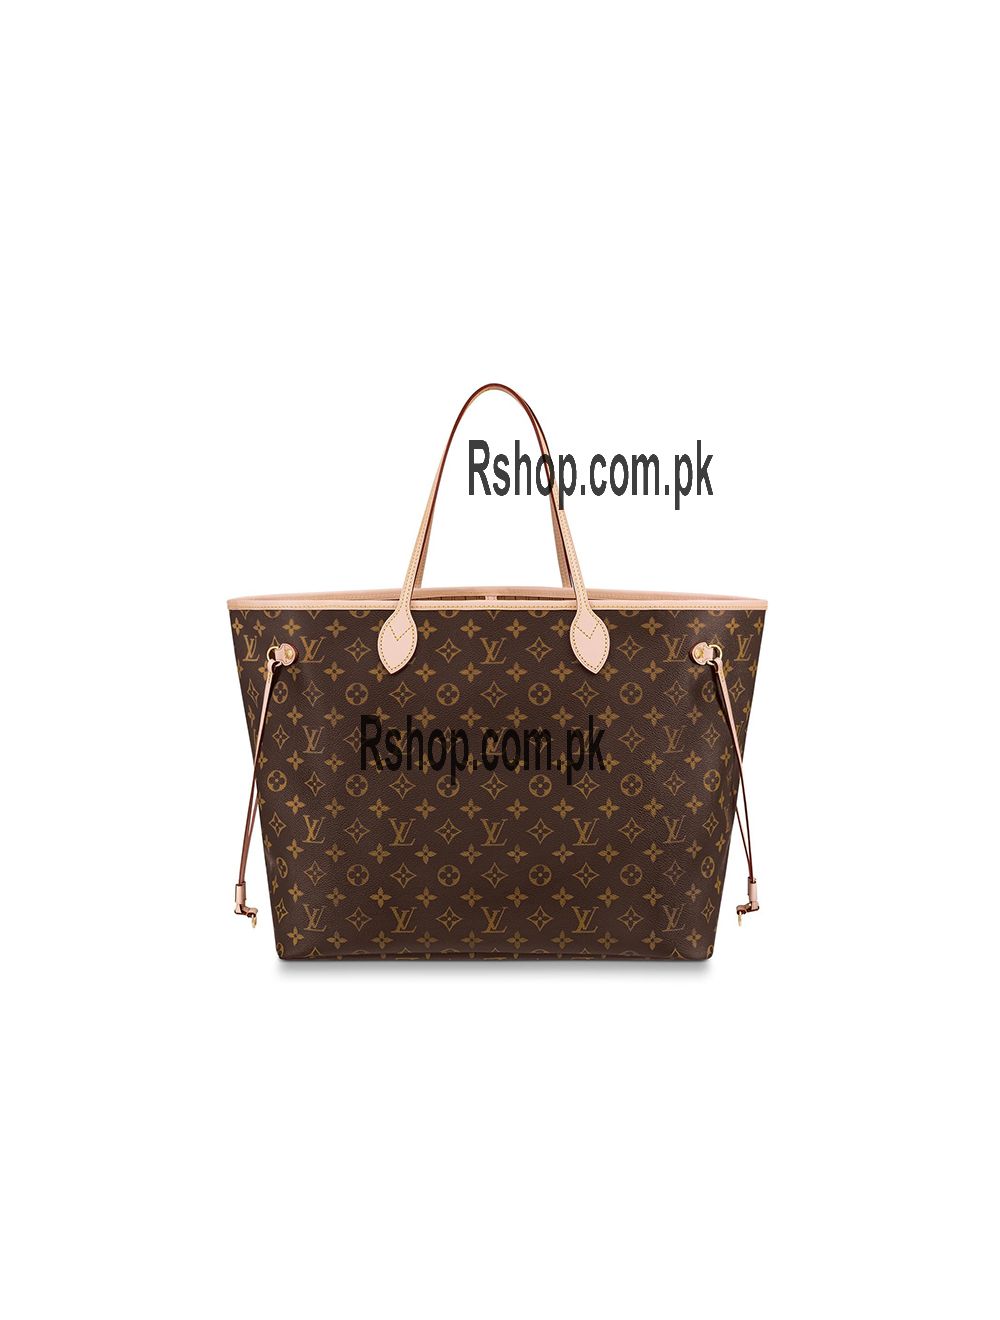 Lv Bags Online Pakistan With